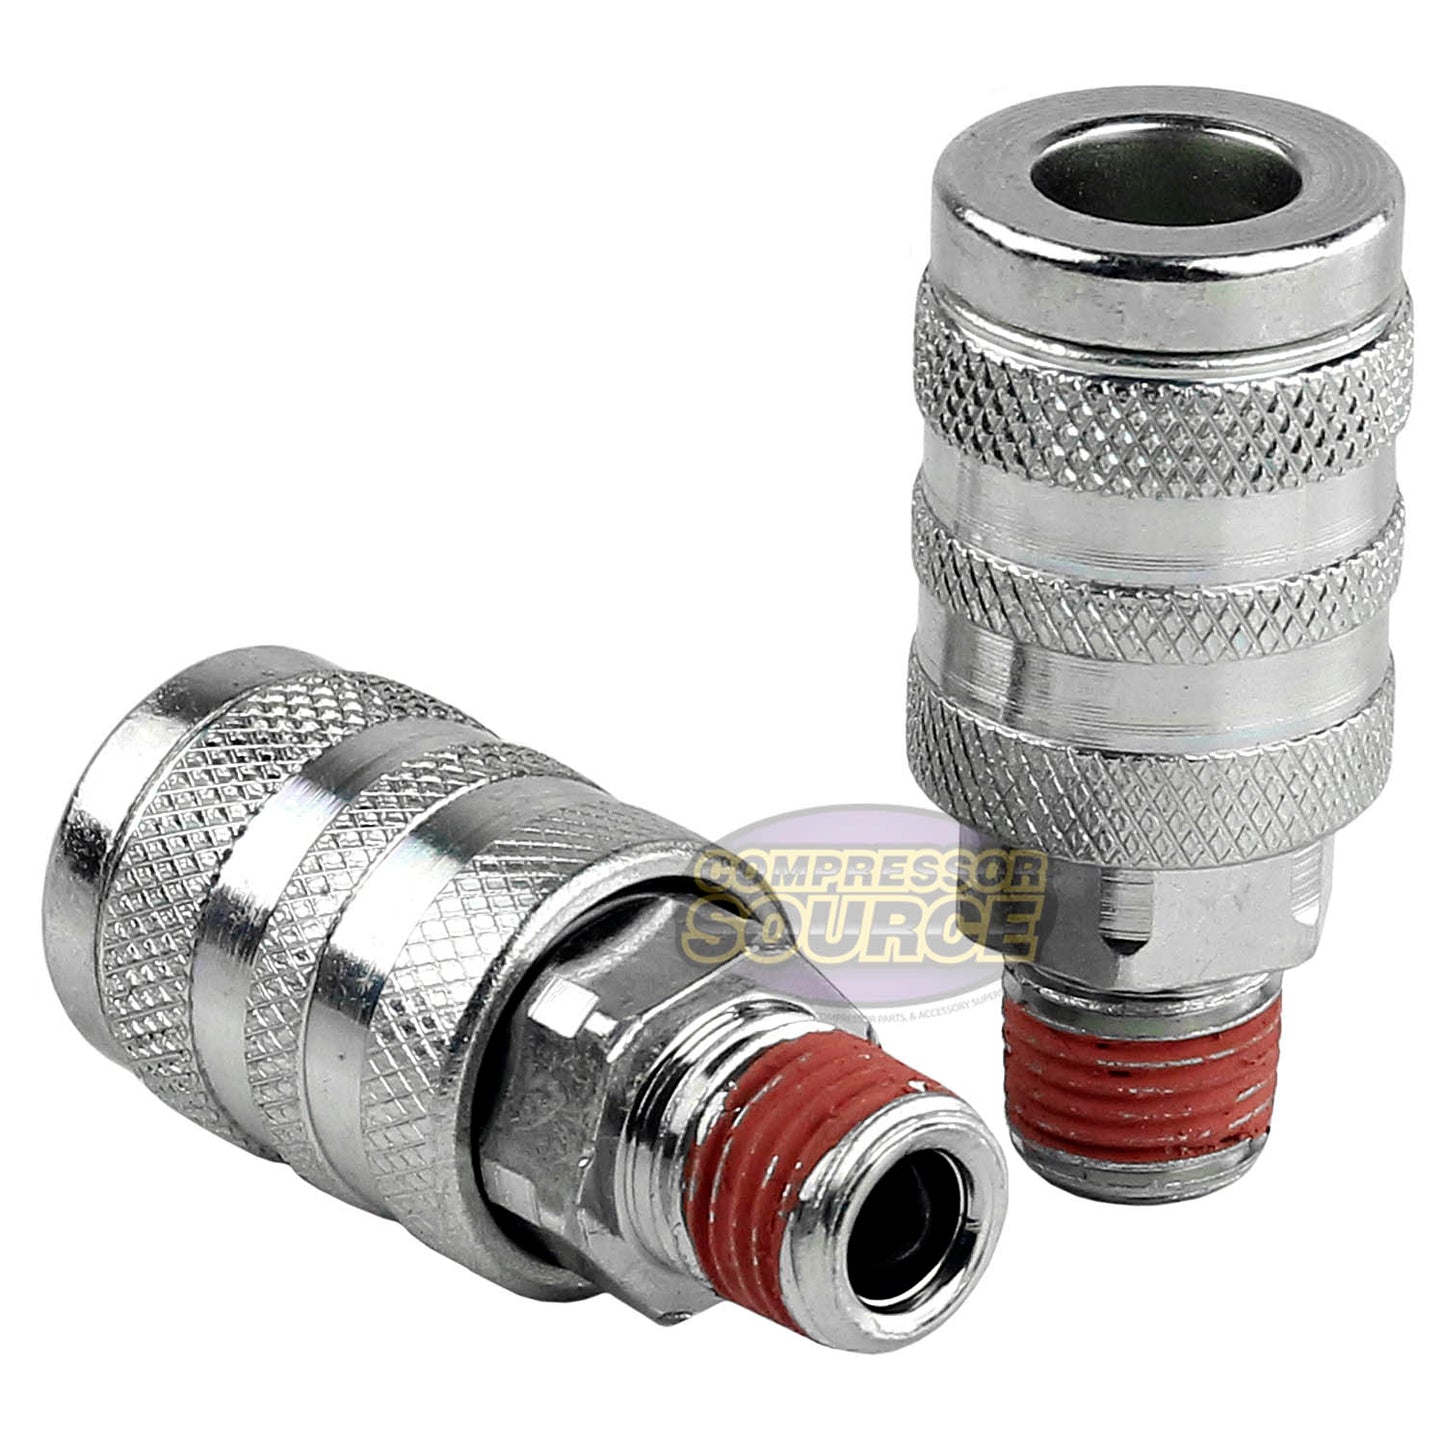 1/4" Air Hose Y Splitter Two 1/4" MNPT Couplers and One 1/4" Industrial Plug